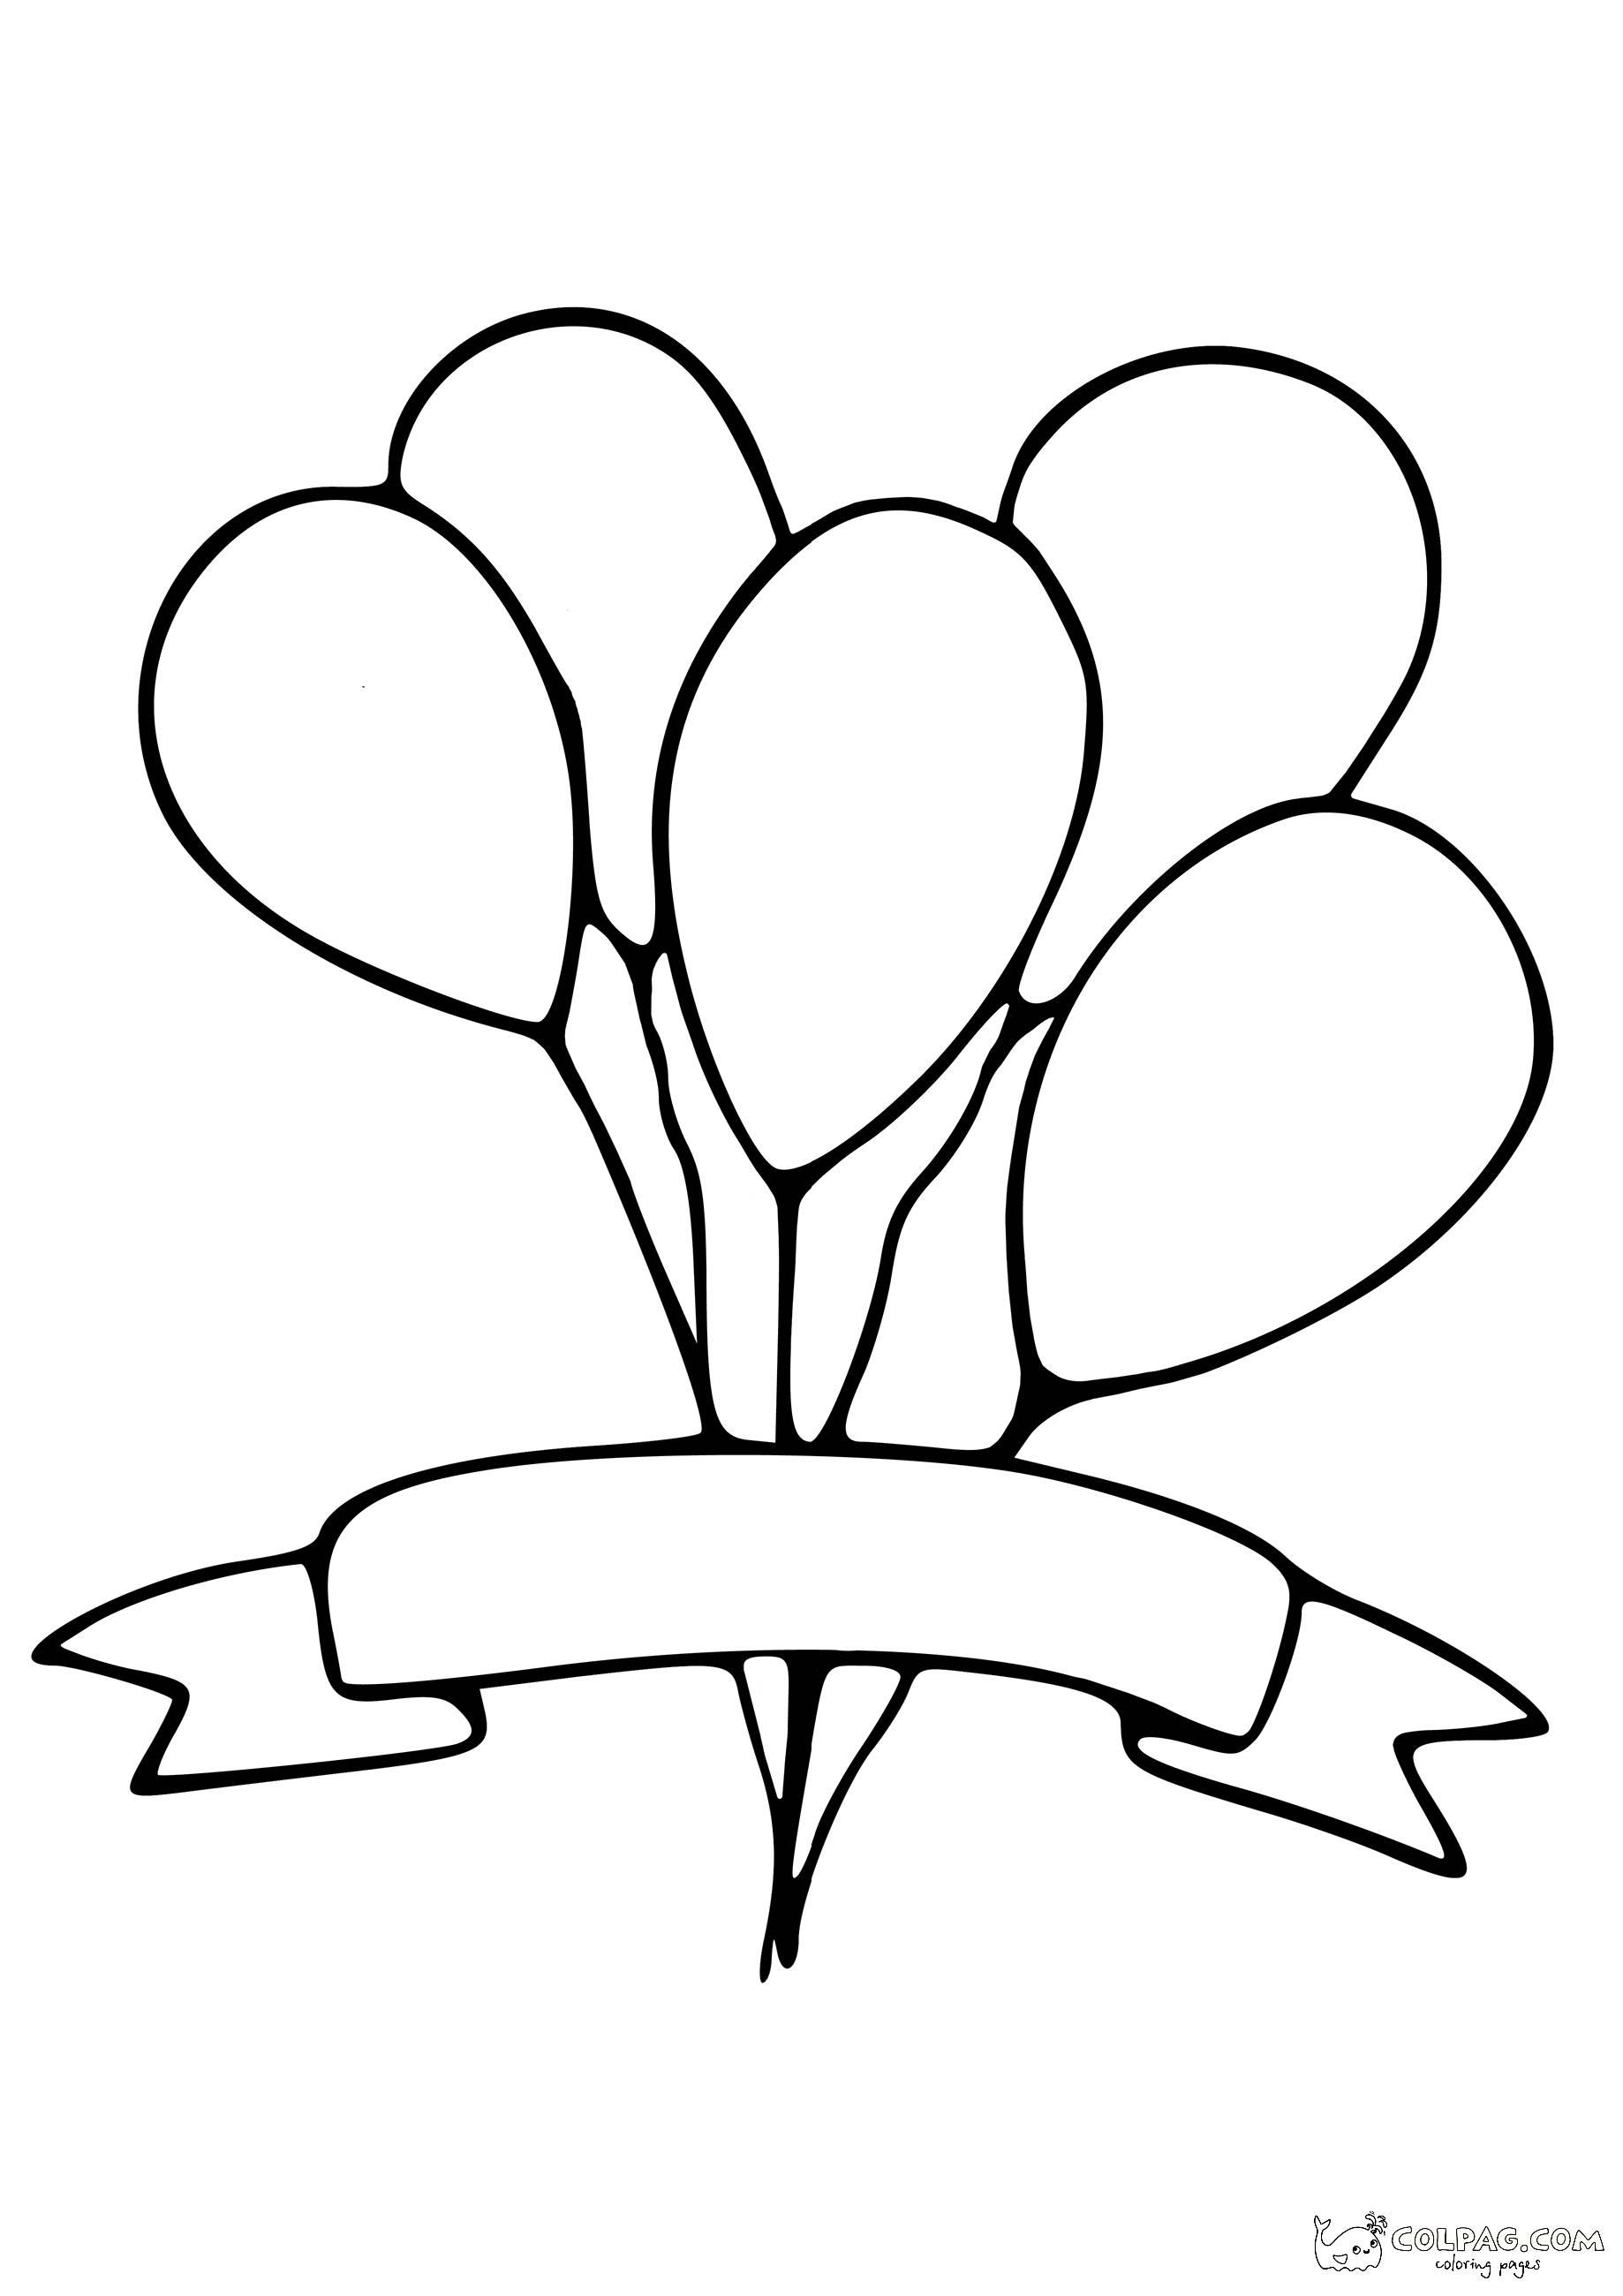 18-baloons-with-warm-words-coloring-page-colpag-18